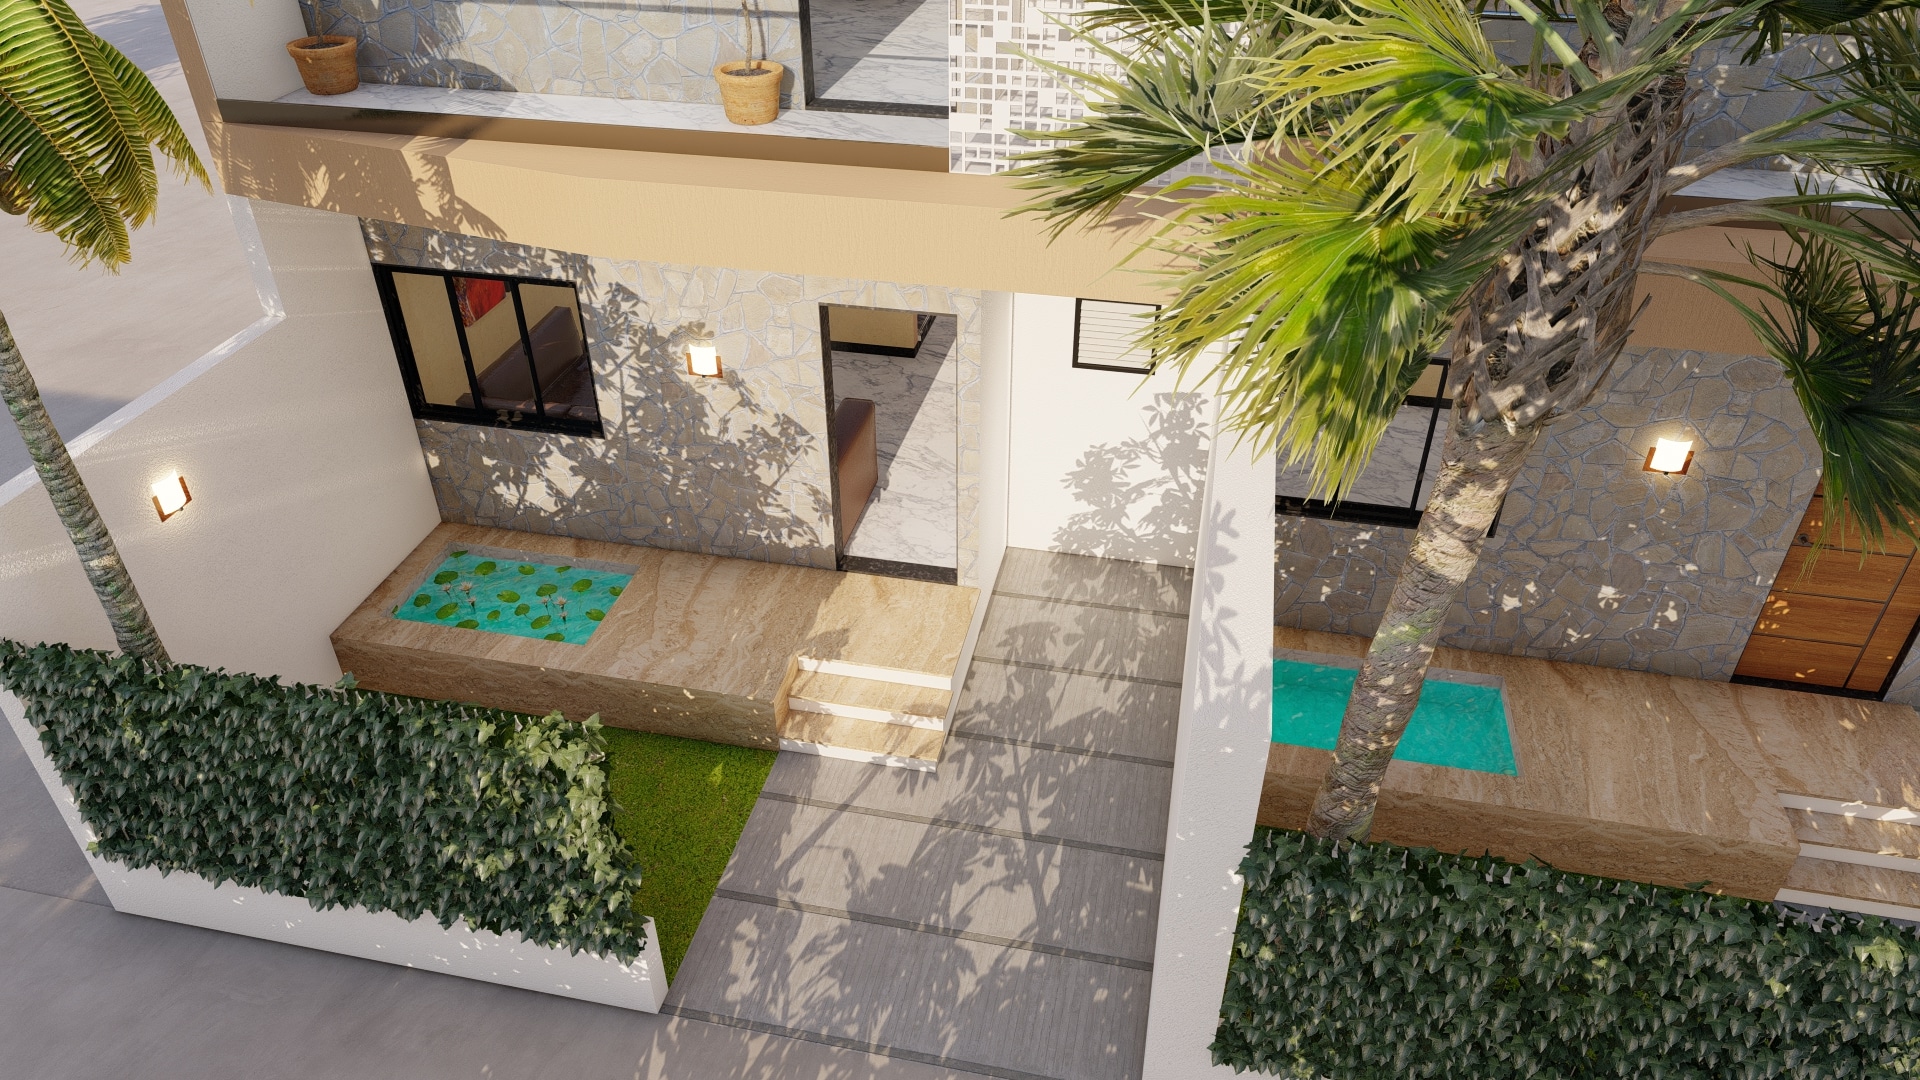 entrance of new duplex layout design north facing 1000 sq ft urban terrace